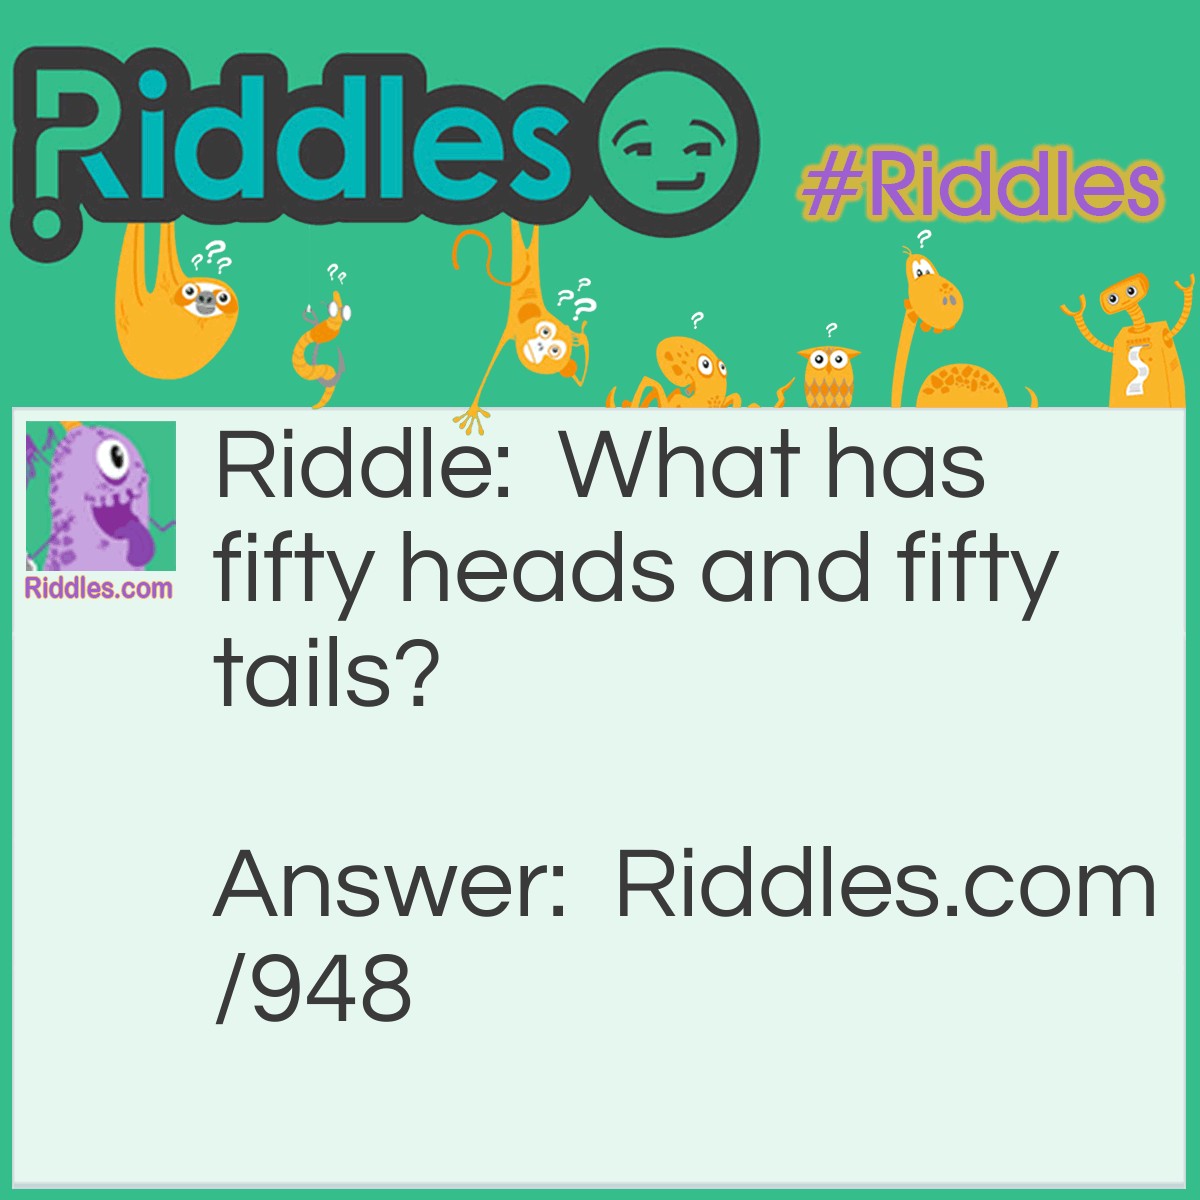 Riddle: What has fifty heads and fifty tails? Answer: Fifty pennies.